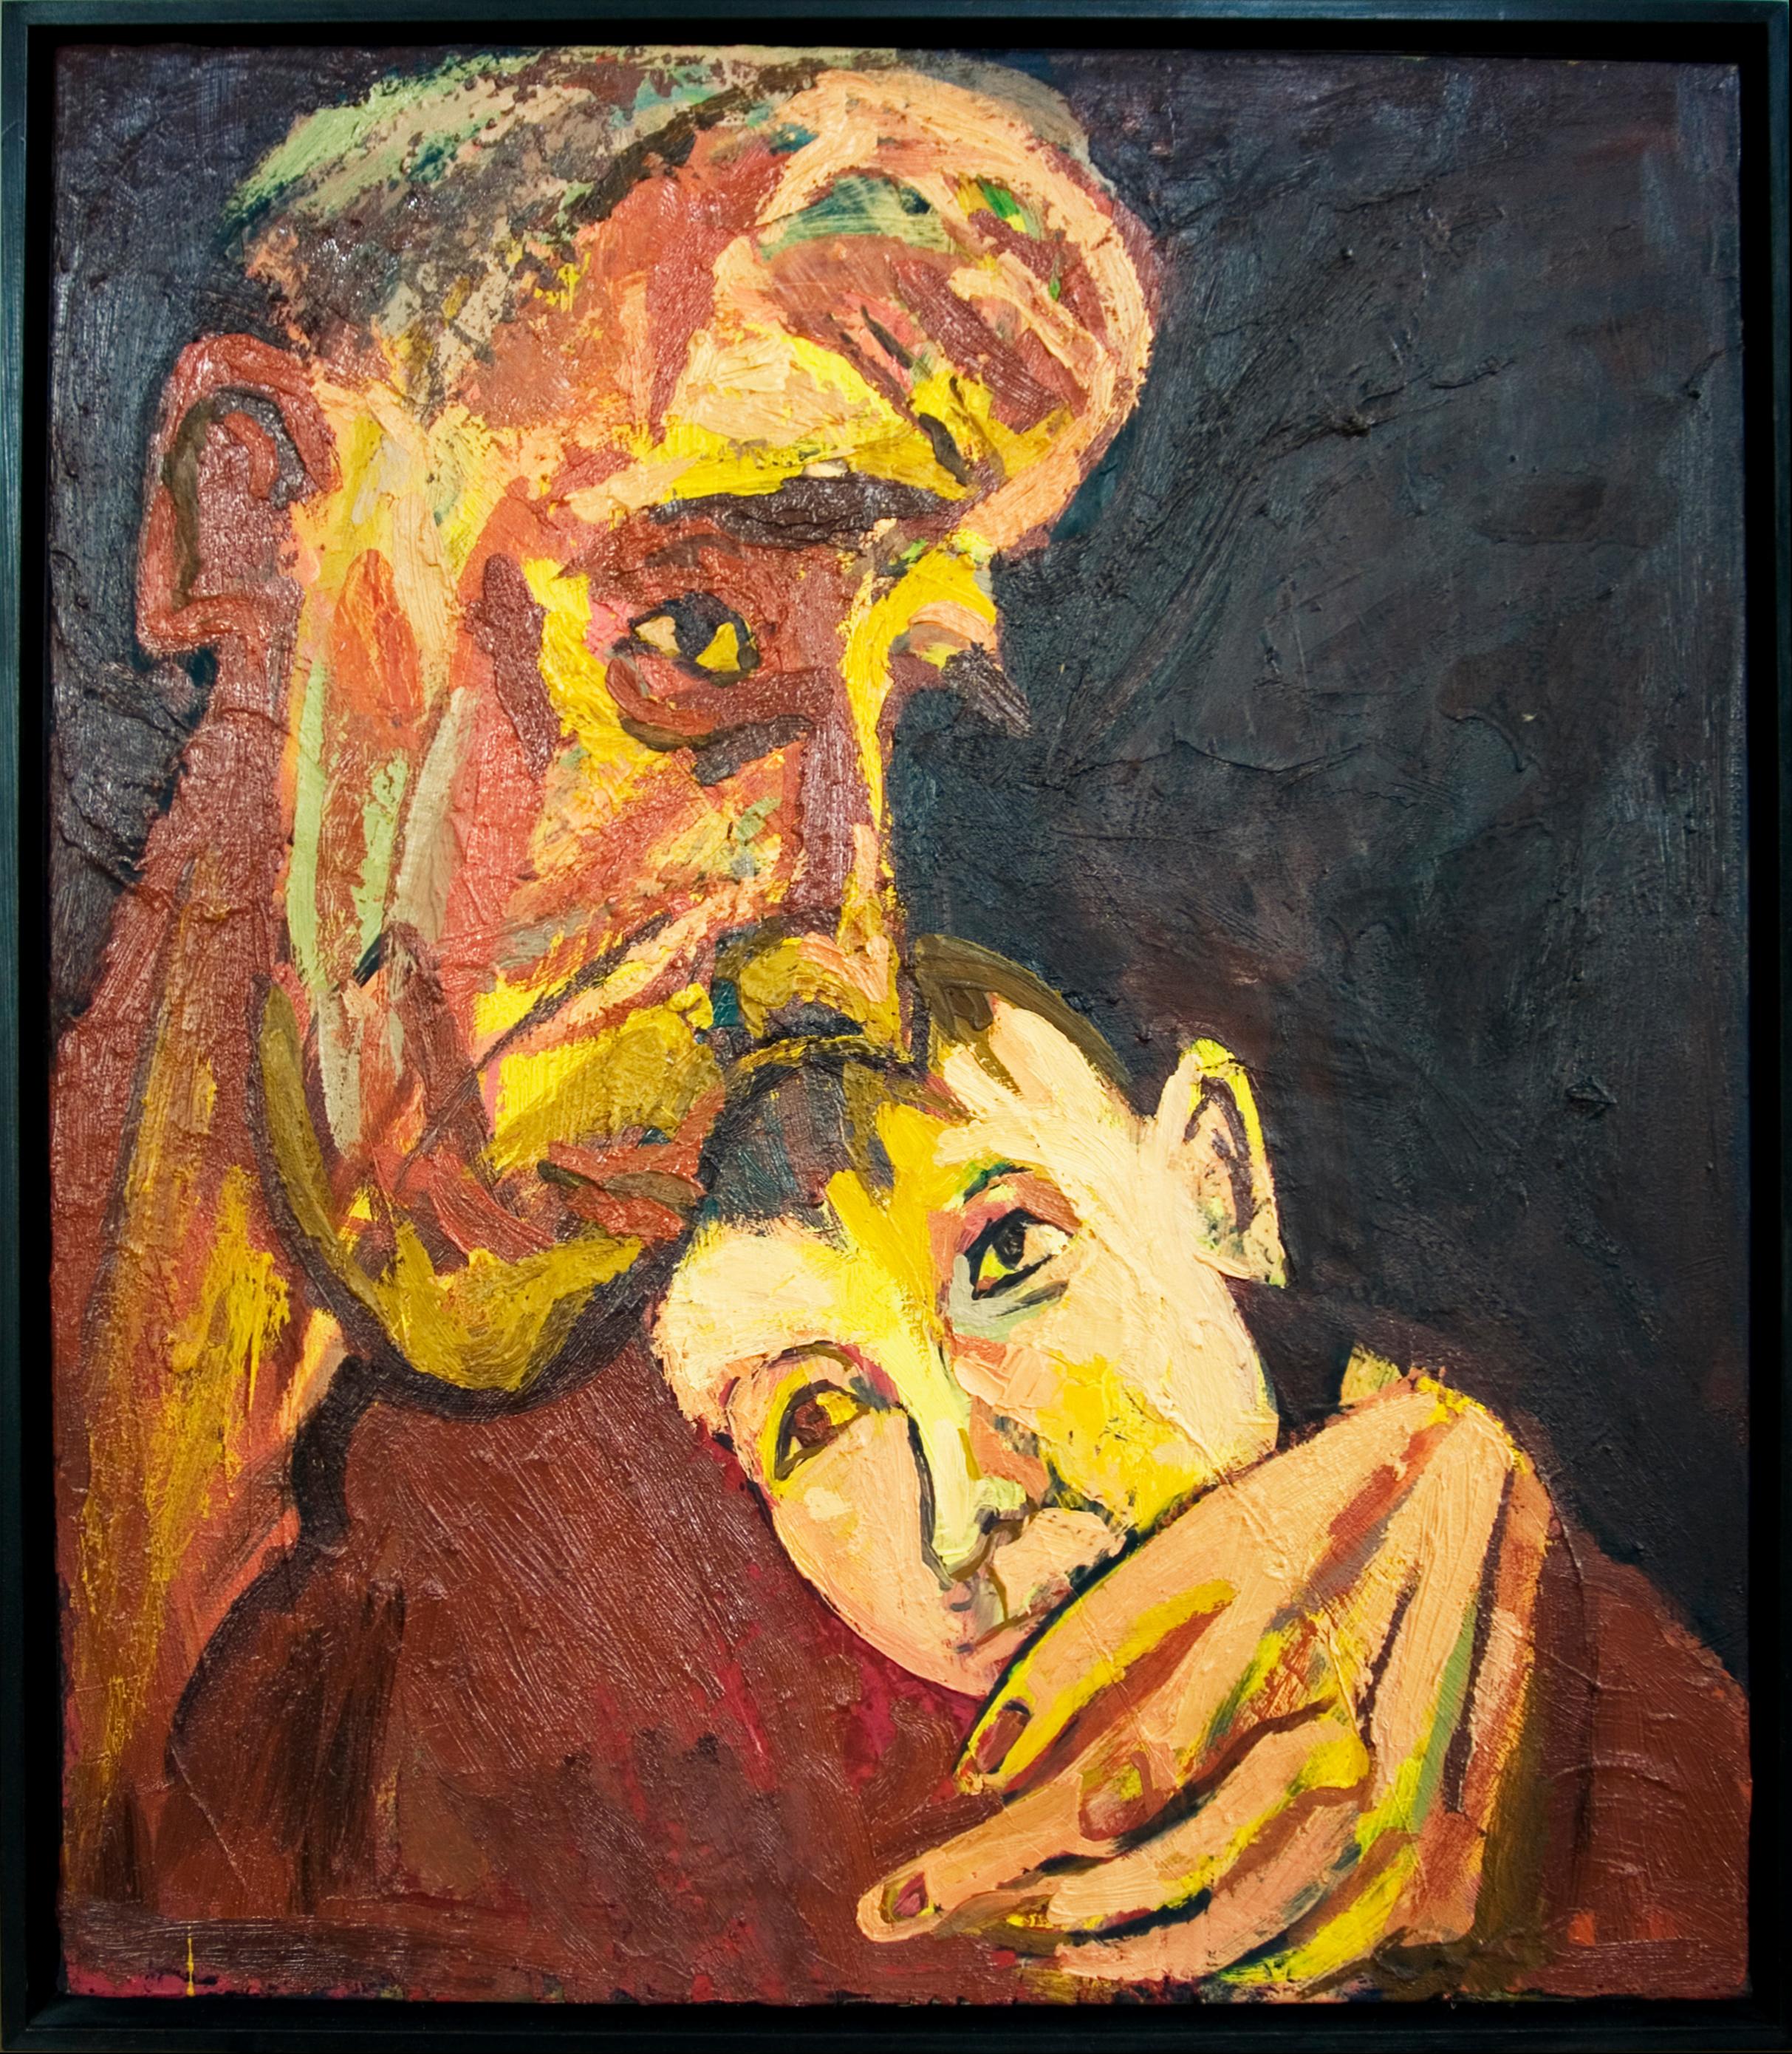 Grandfather and Grandson - Painting by Maxim Kantor